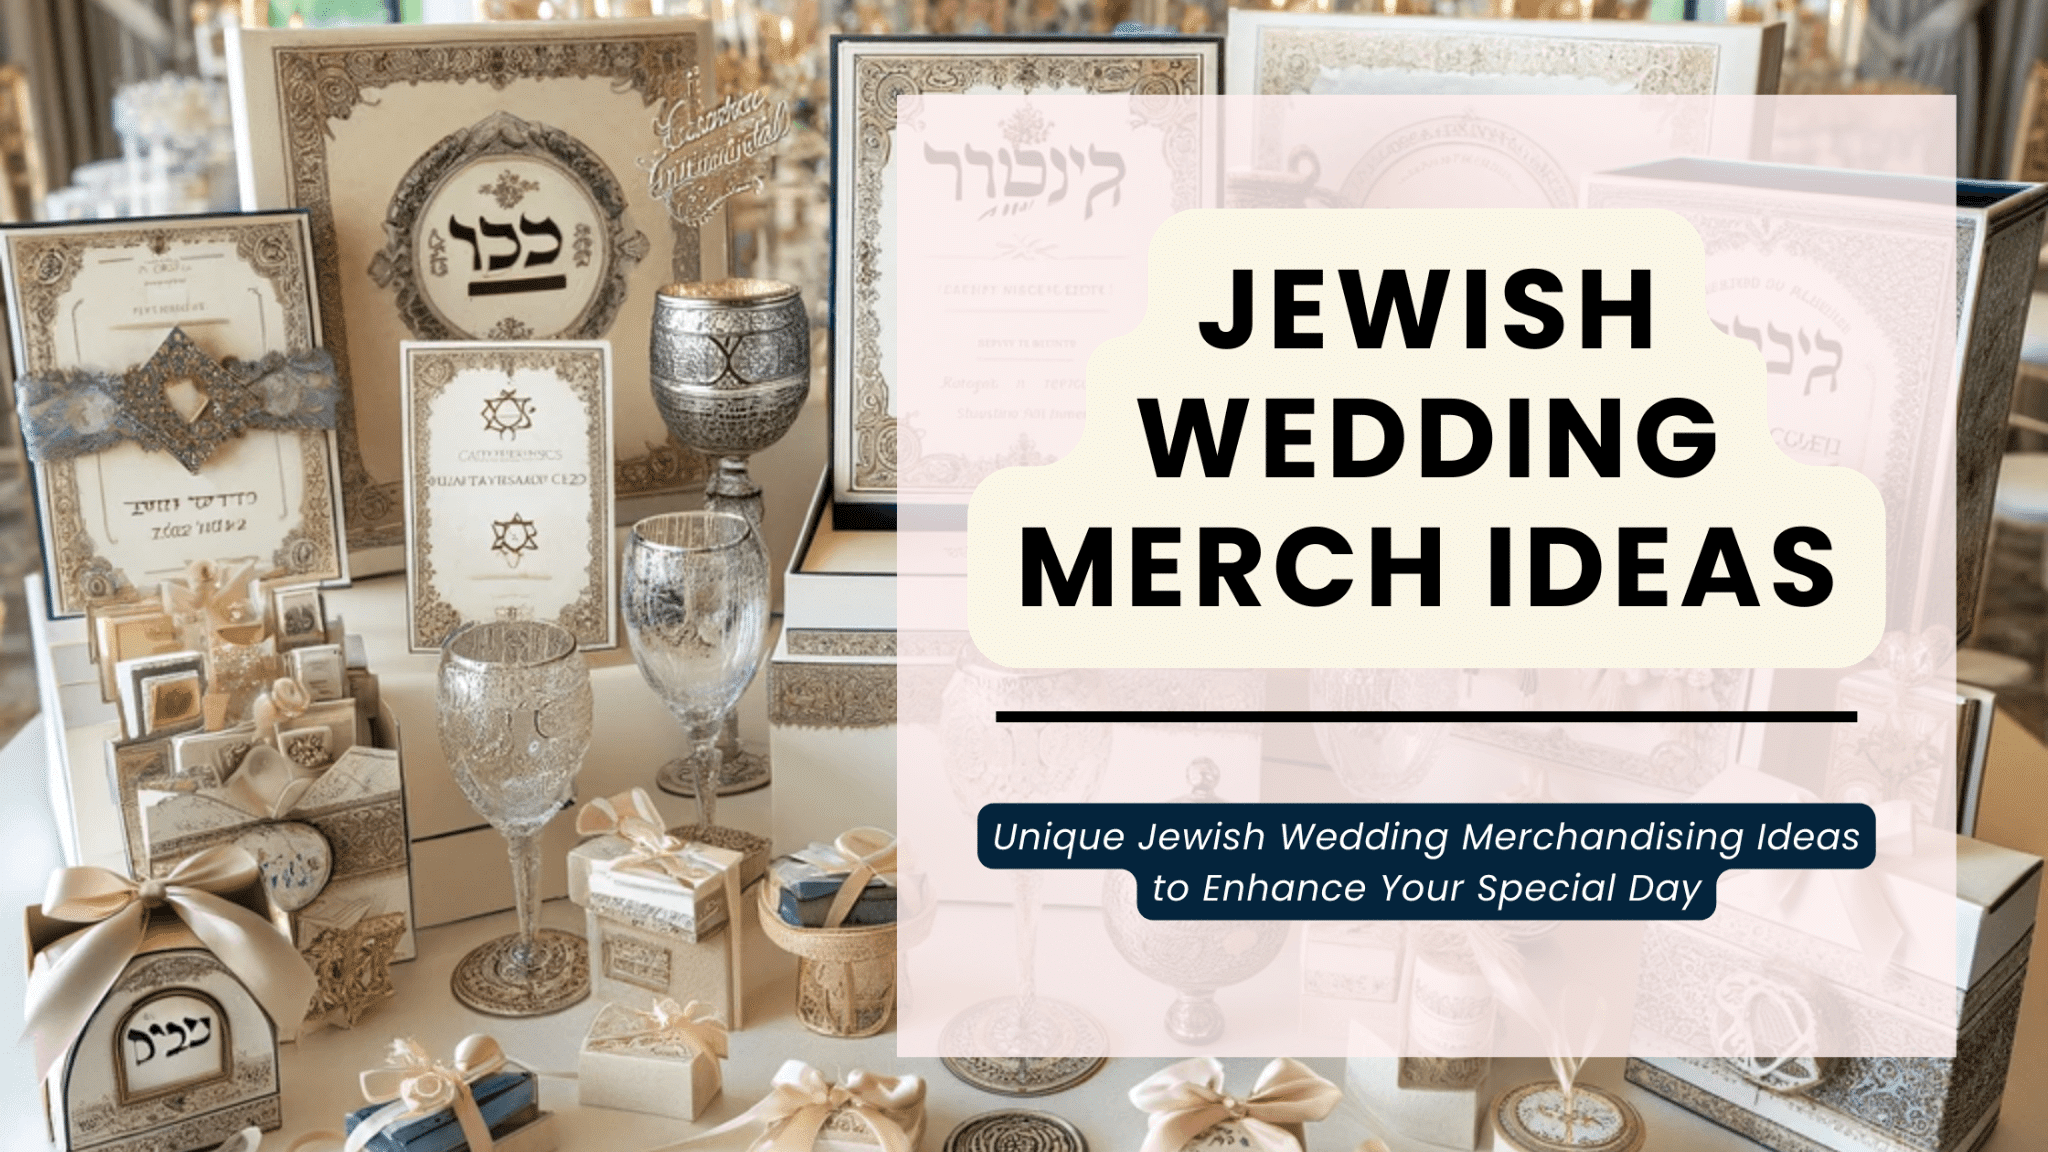 Unique Jewish Wedding Merchandising Ideas to Enhance Your Special Day